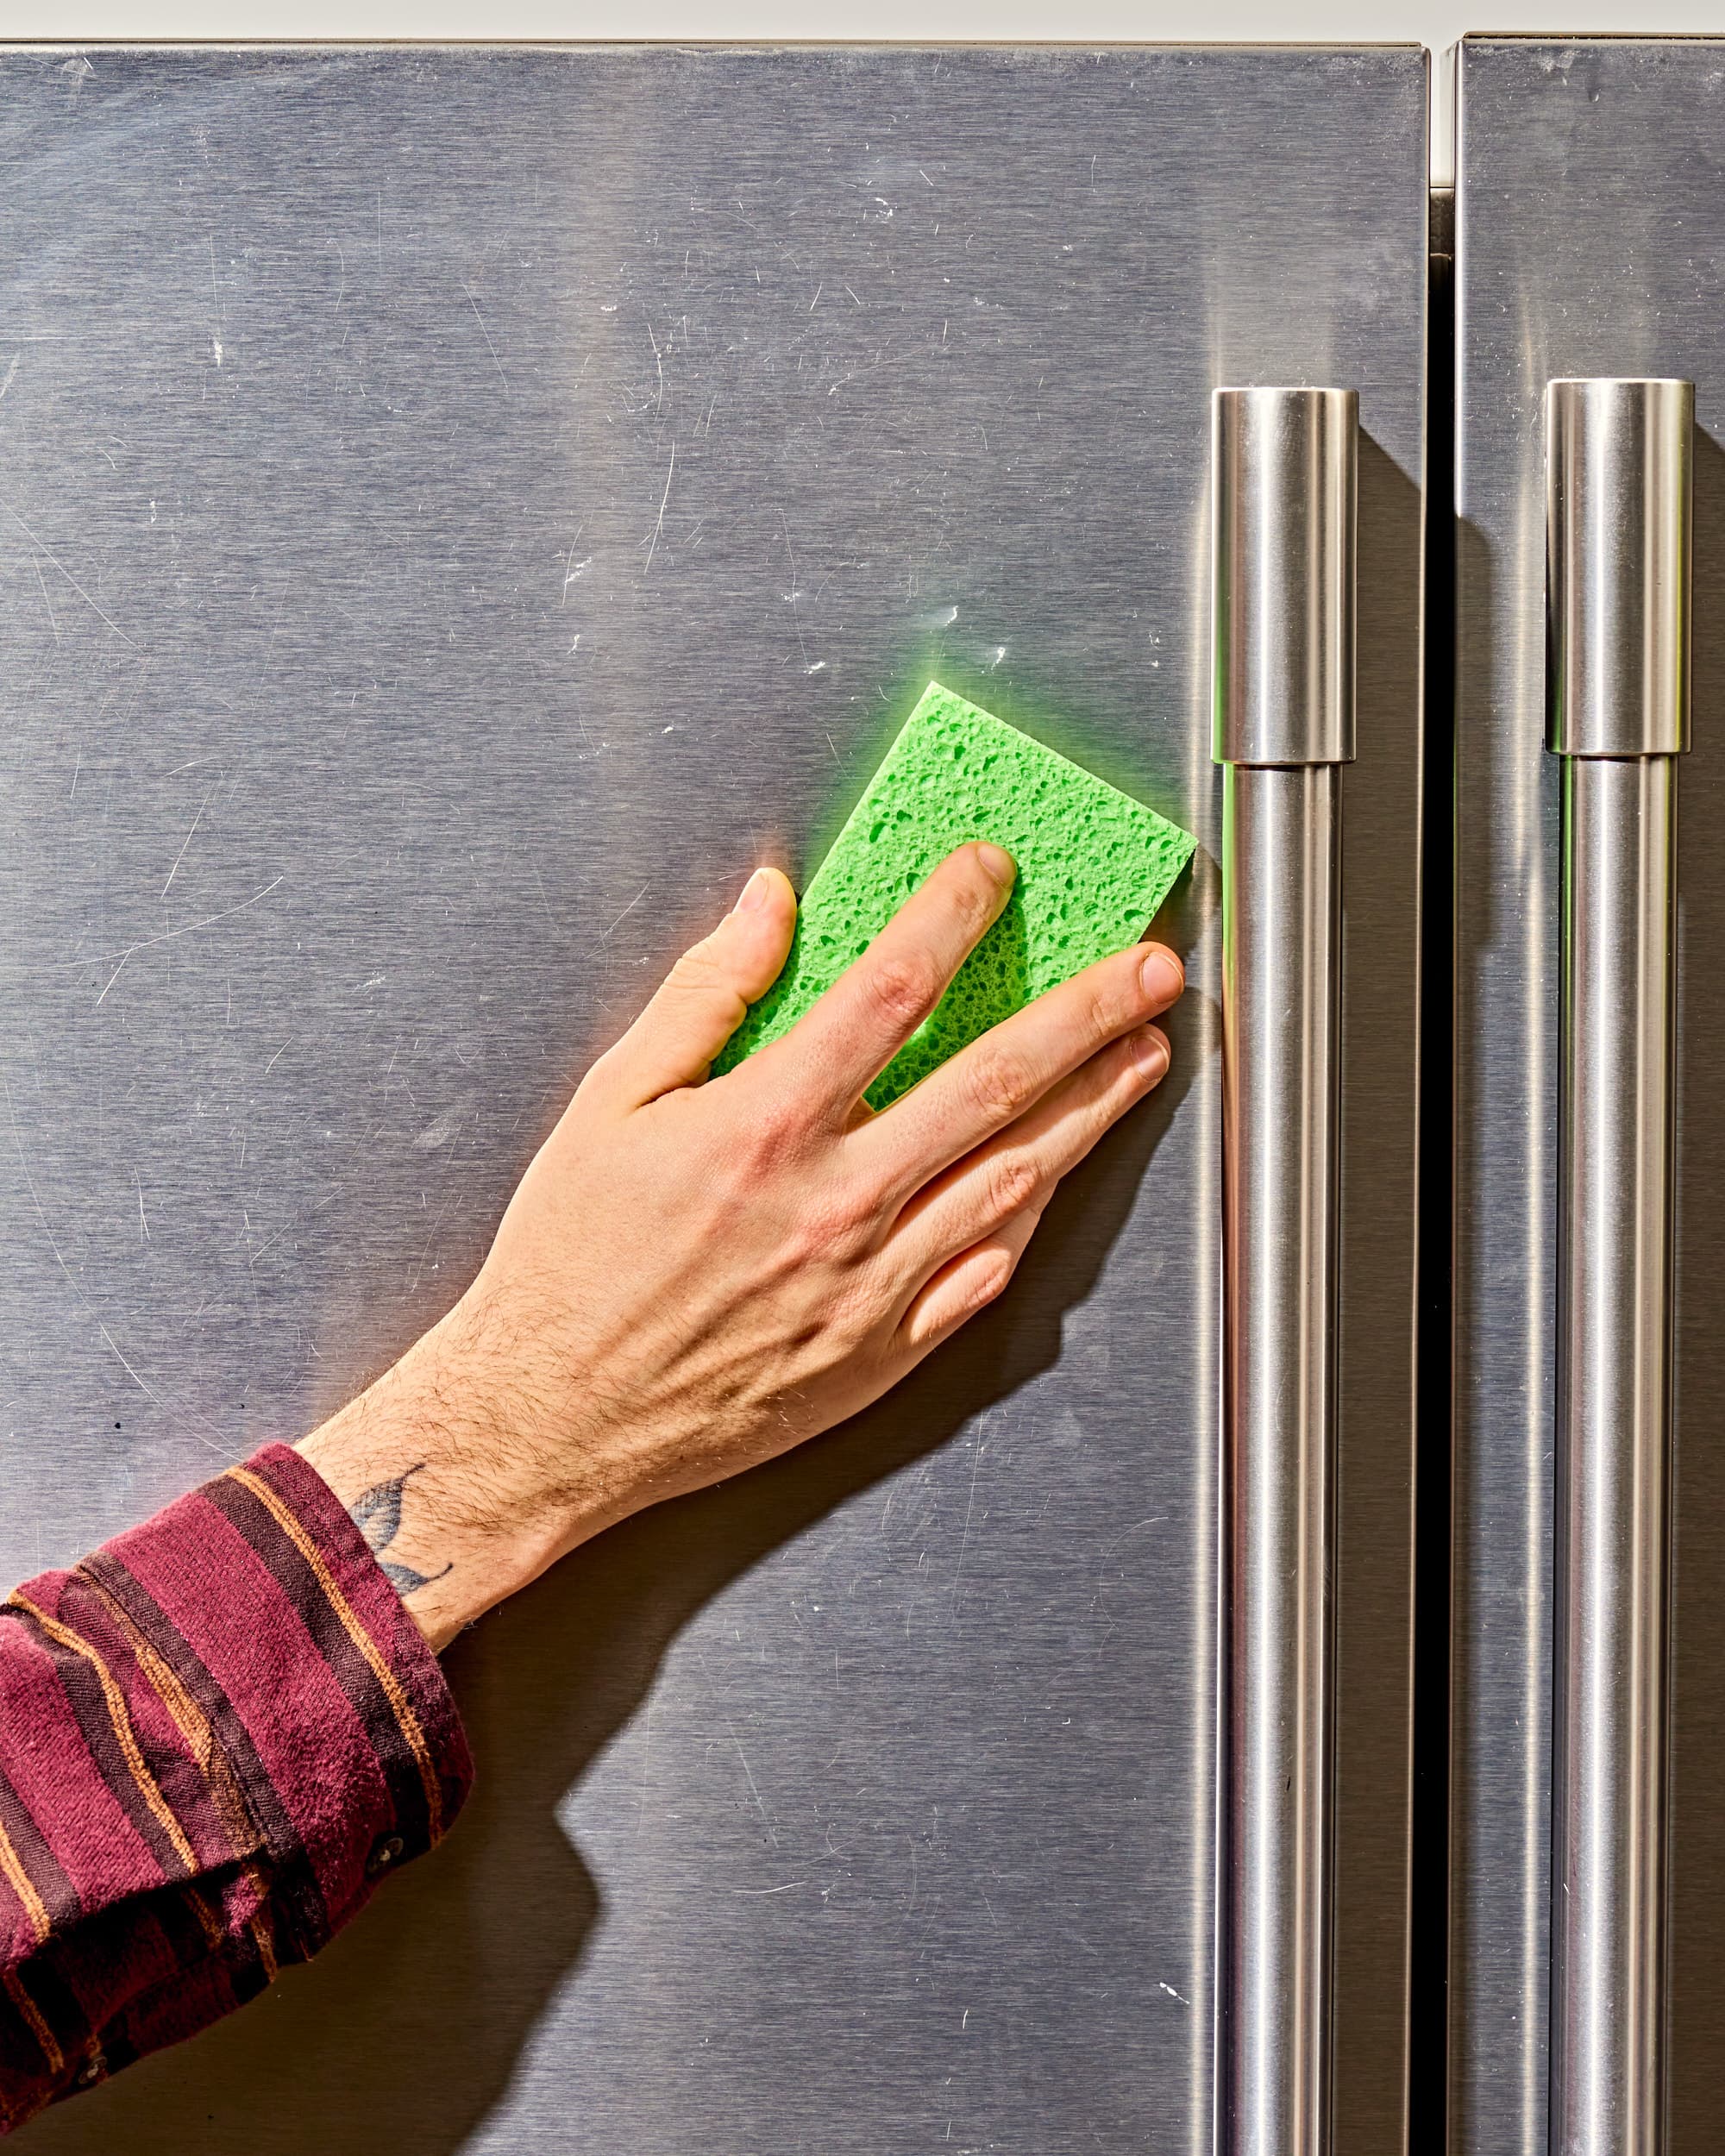 How to Keep Your Fridge Stain-Free? Explore theses simple pointers–